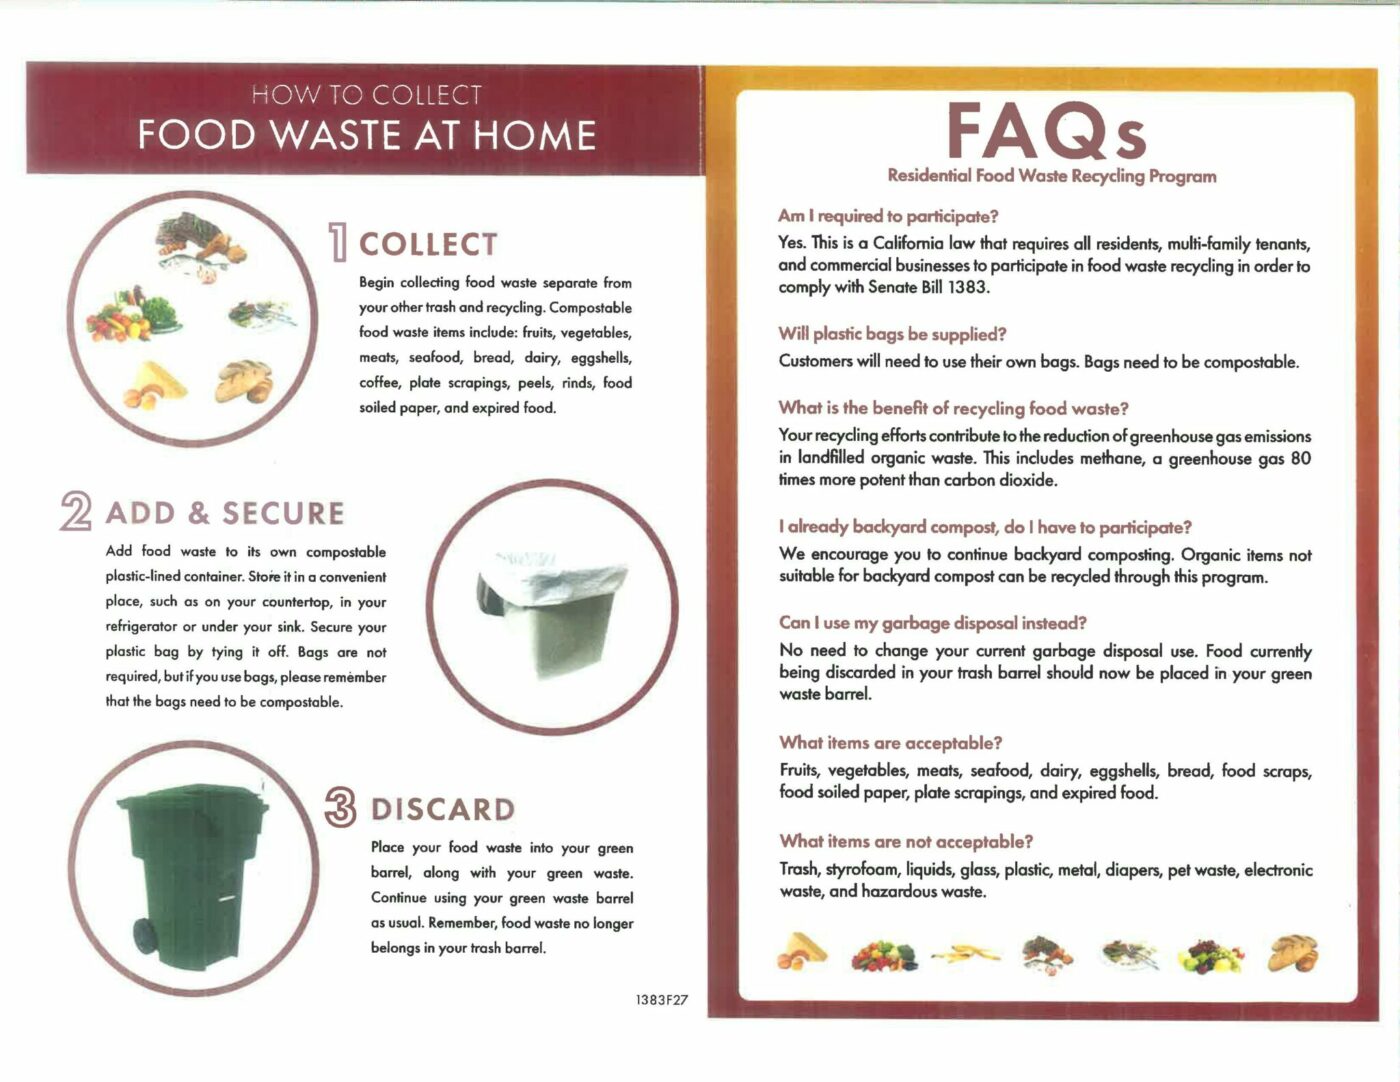 How to collect food waste at home